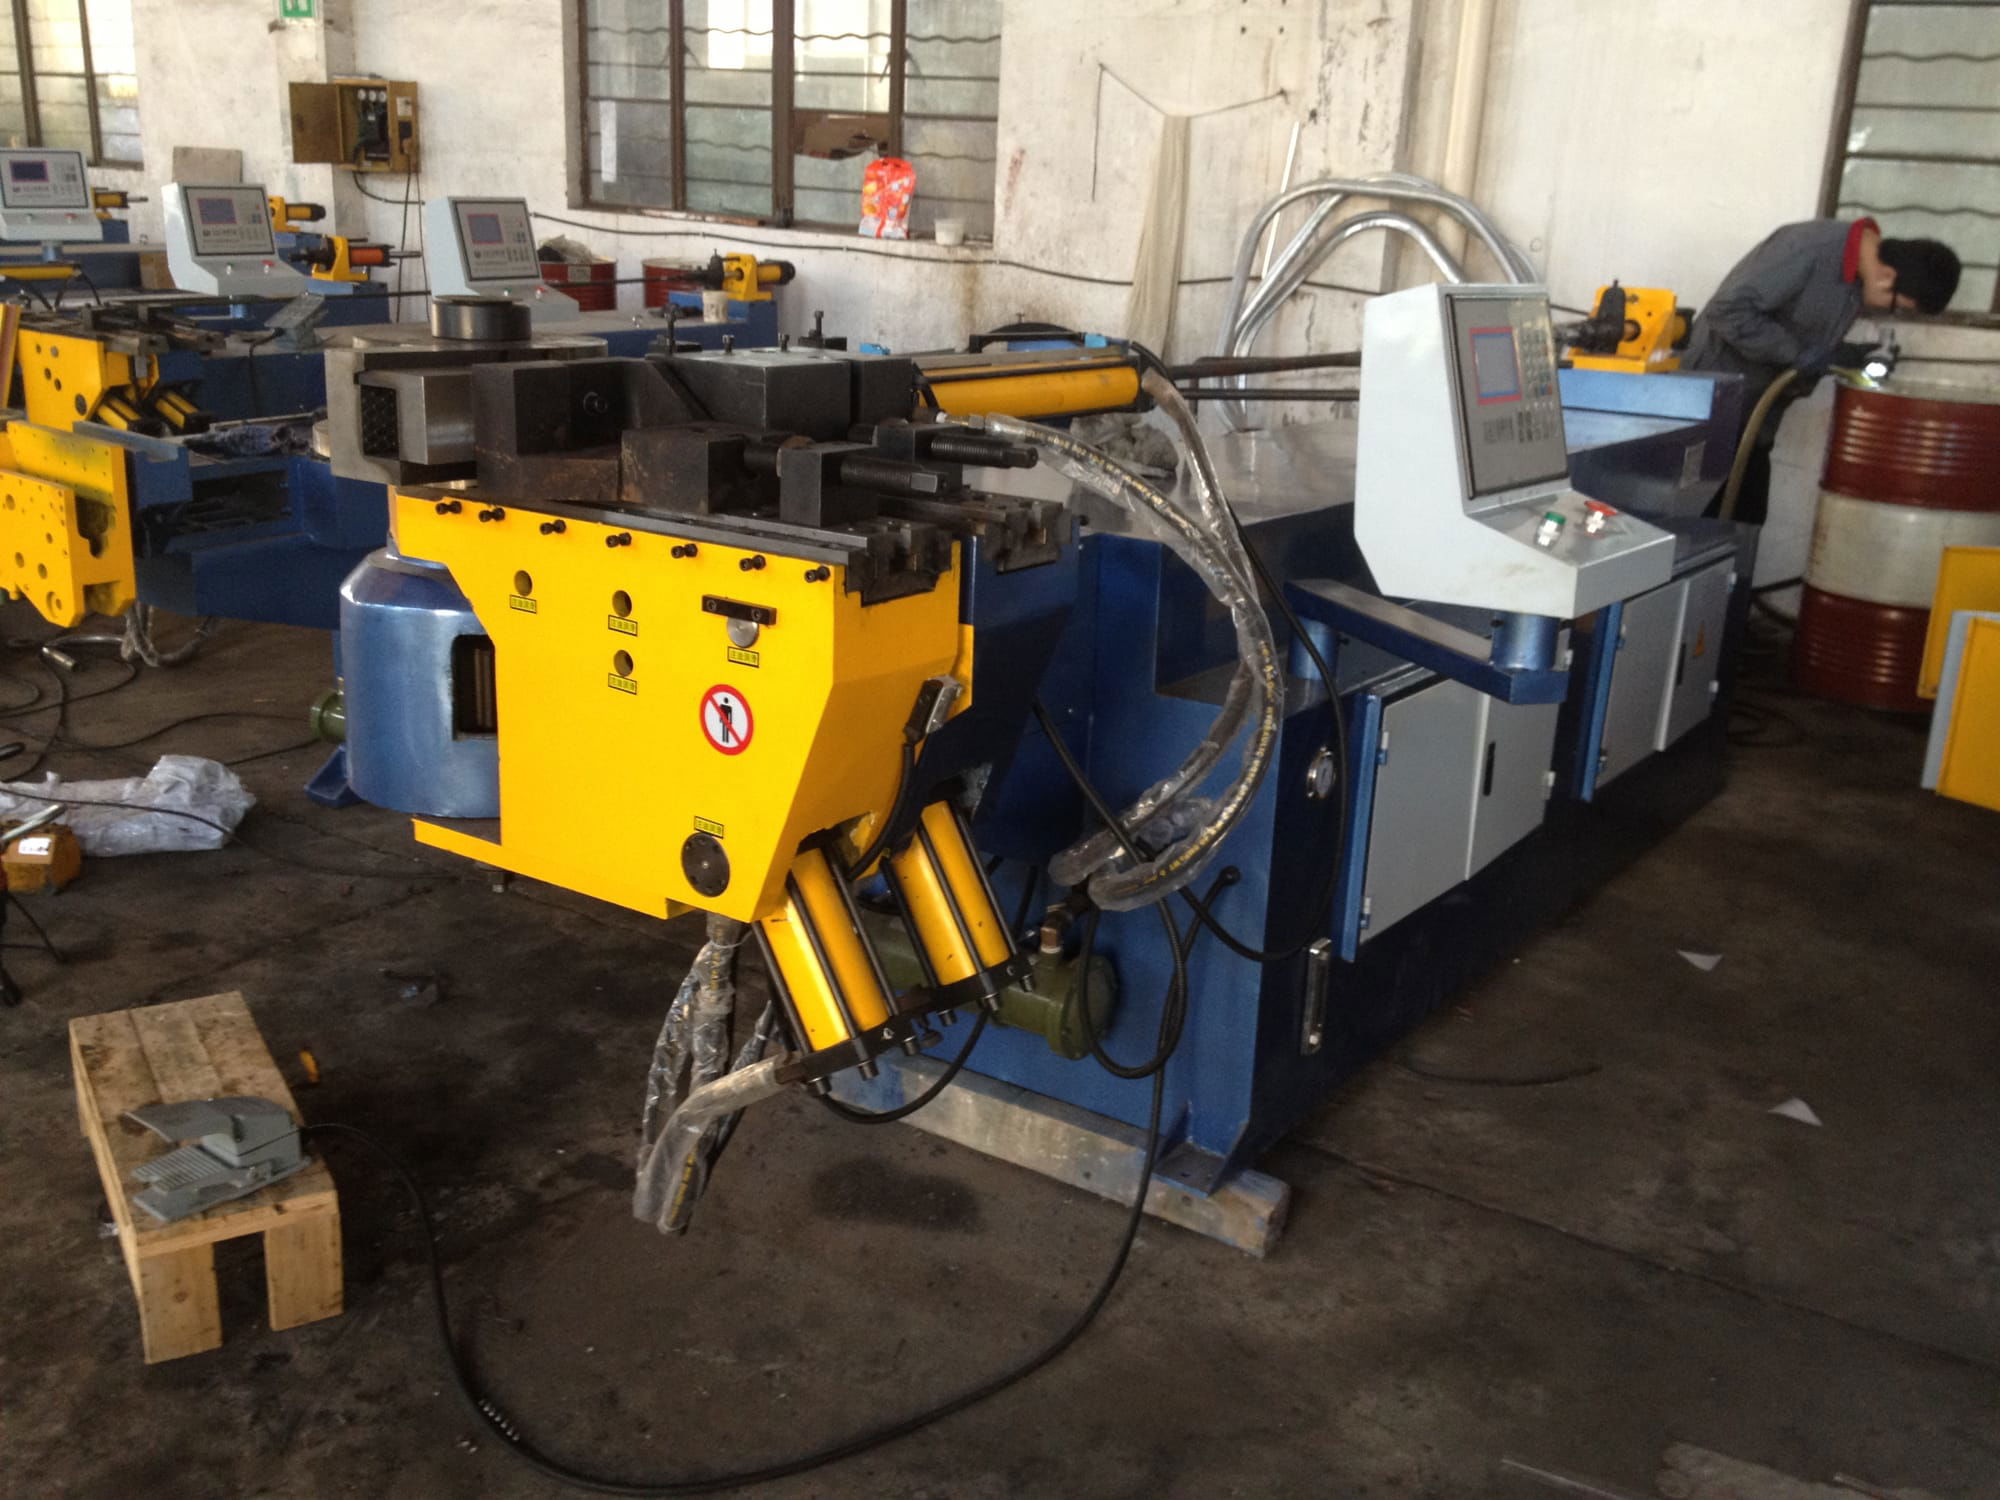 What are the models of cnc pipe bending machine for bending stainless steel?